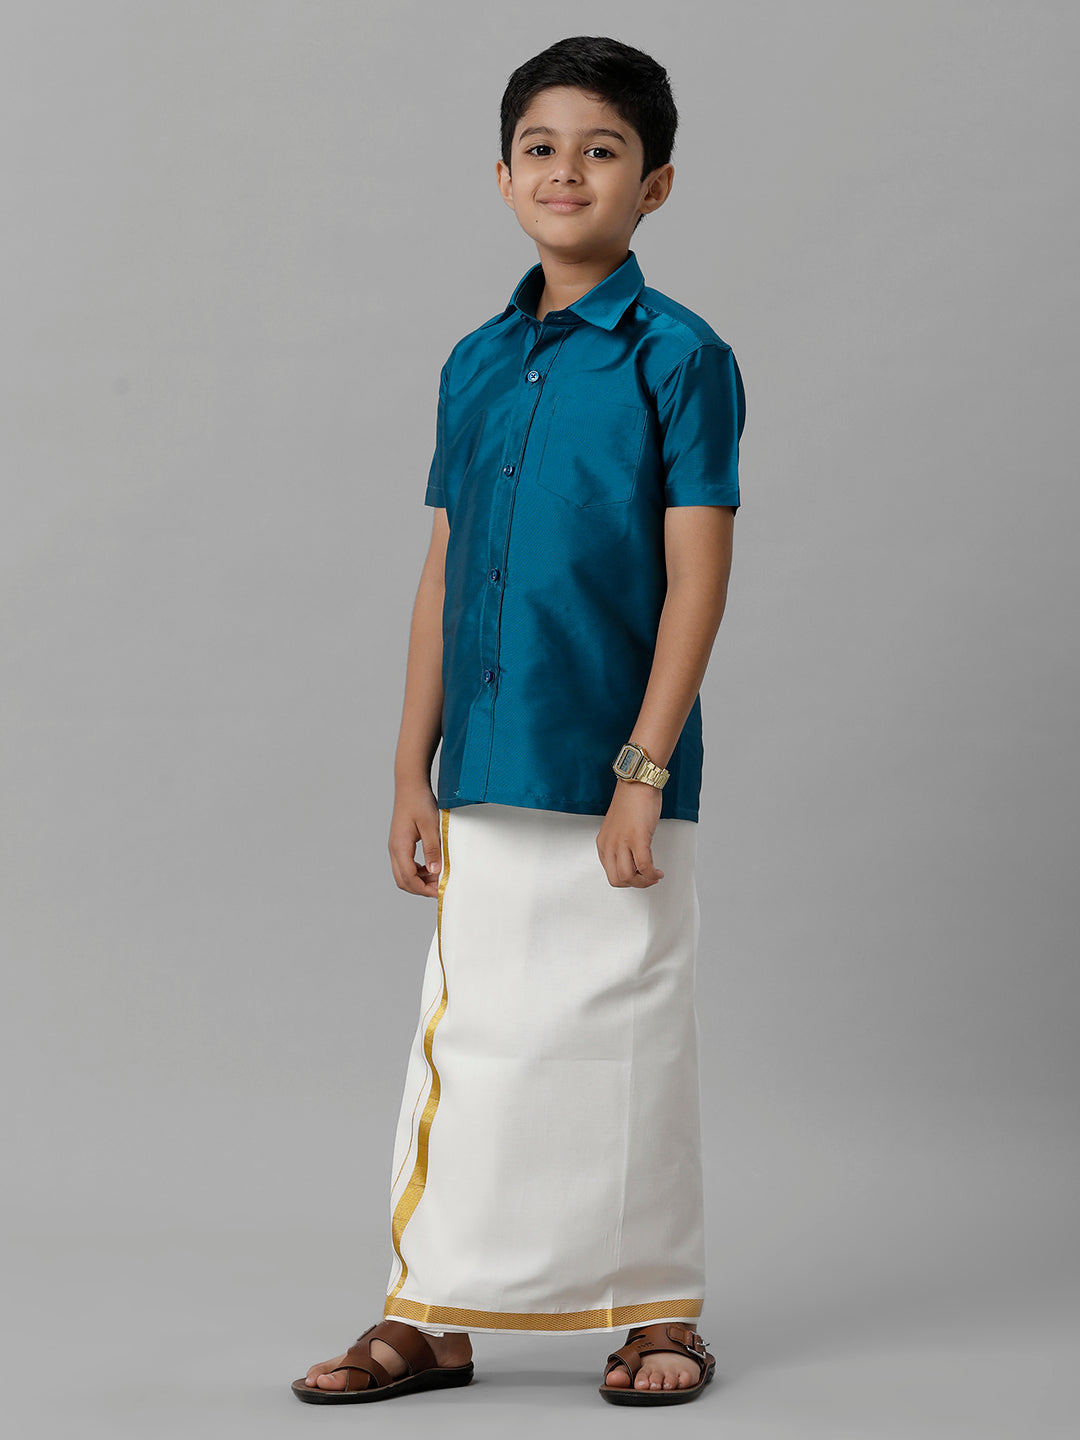 Boys Silk Cotton Light Blue Half Sleeves Shirt with Adjustable Cream Dhoti Combo K1-Front view